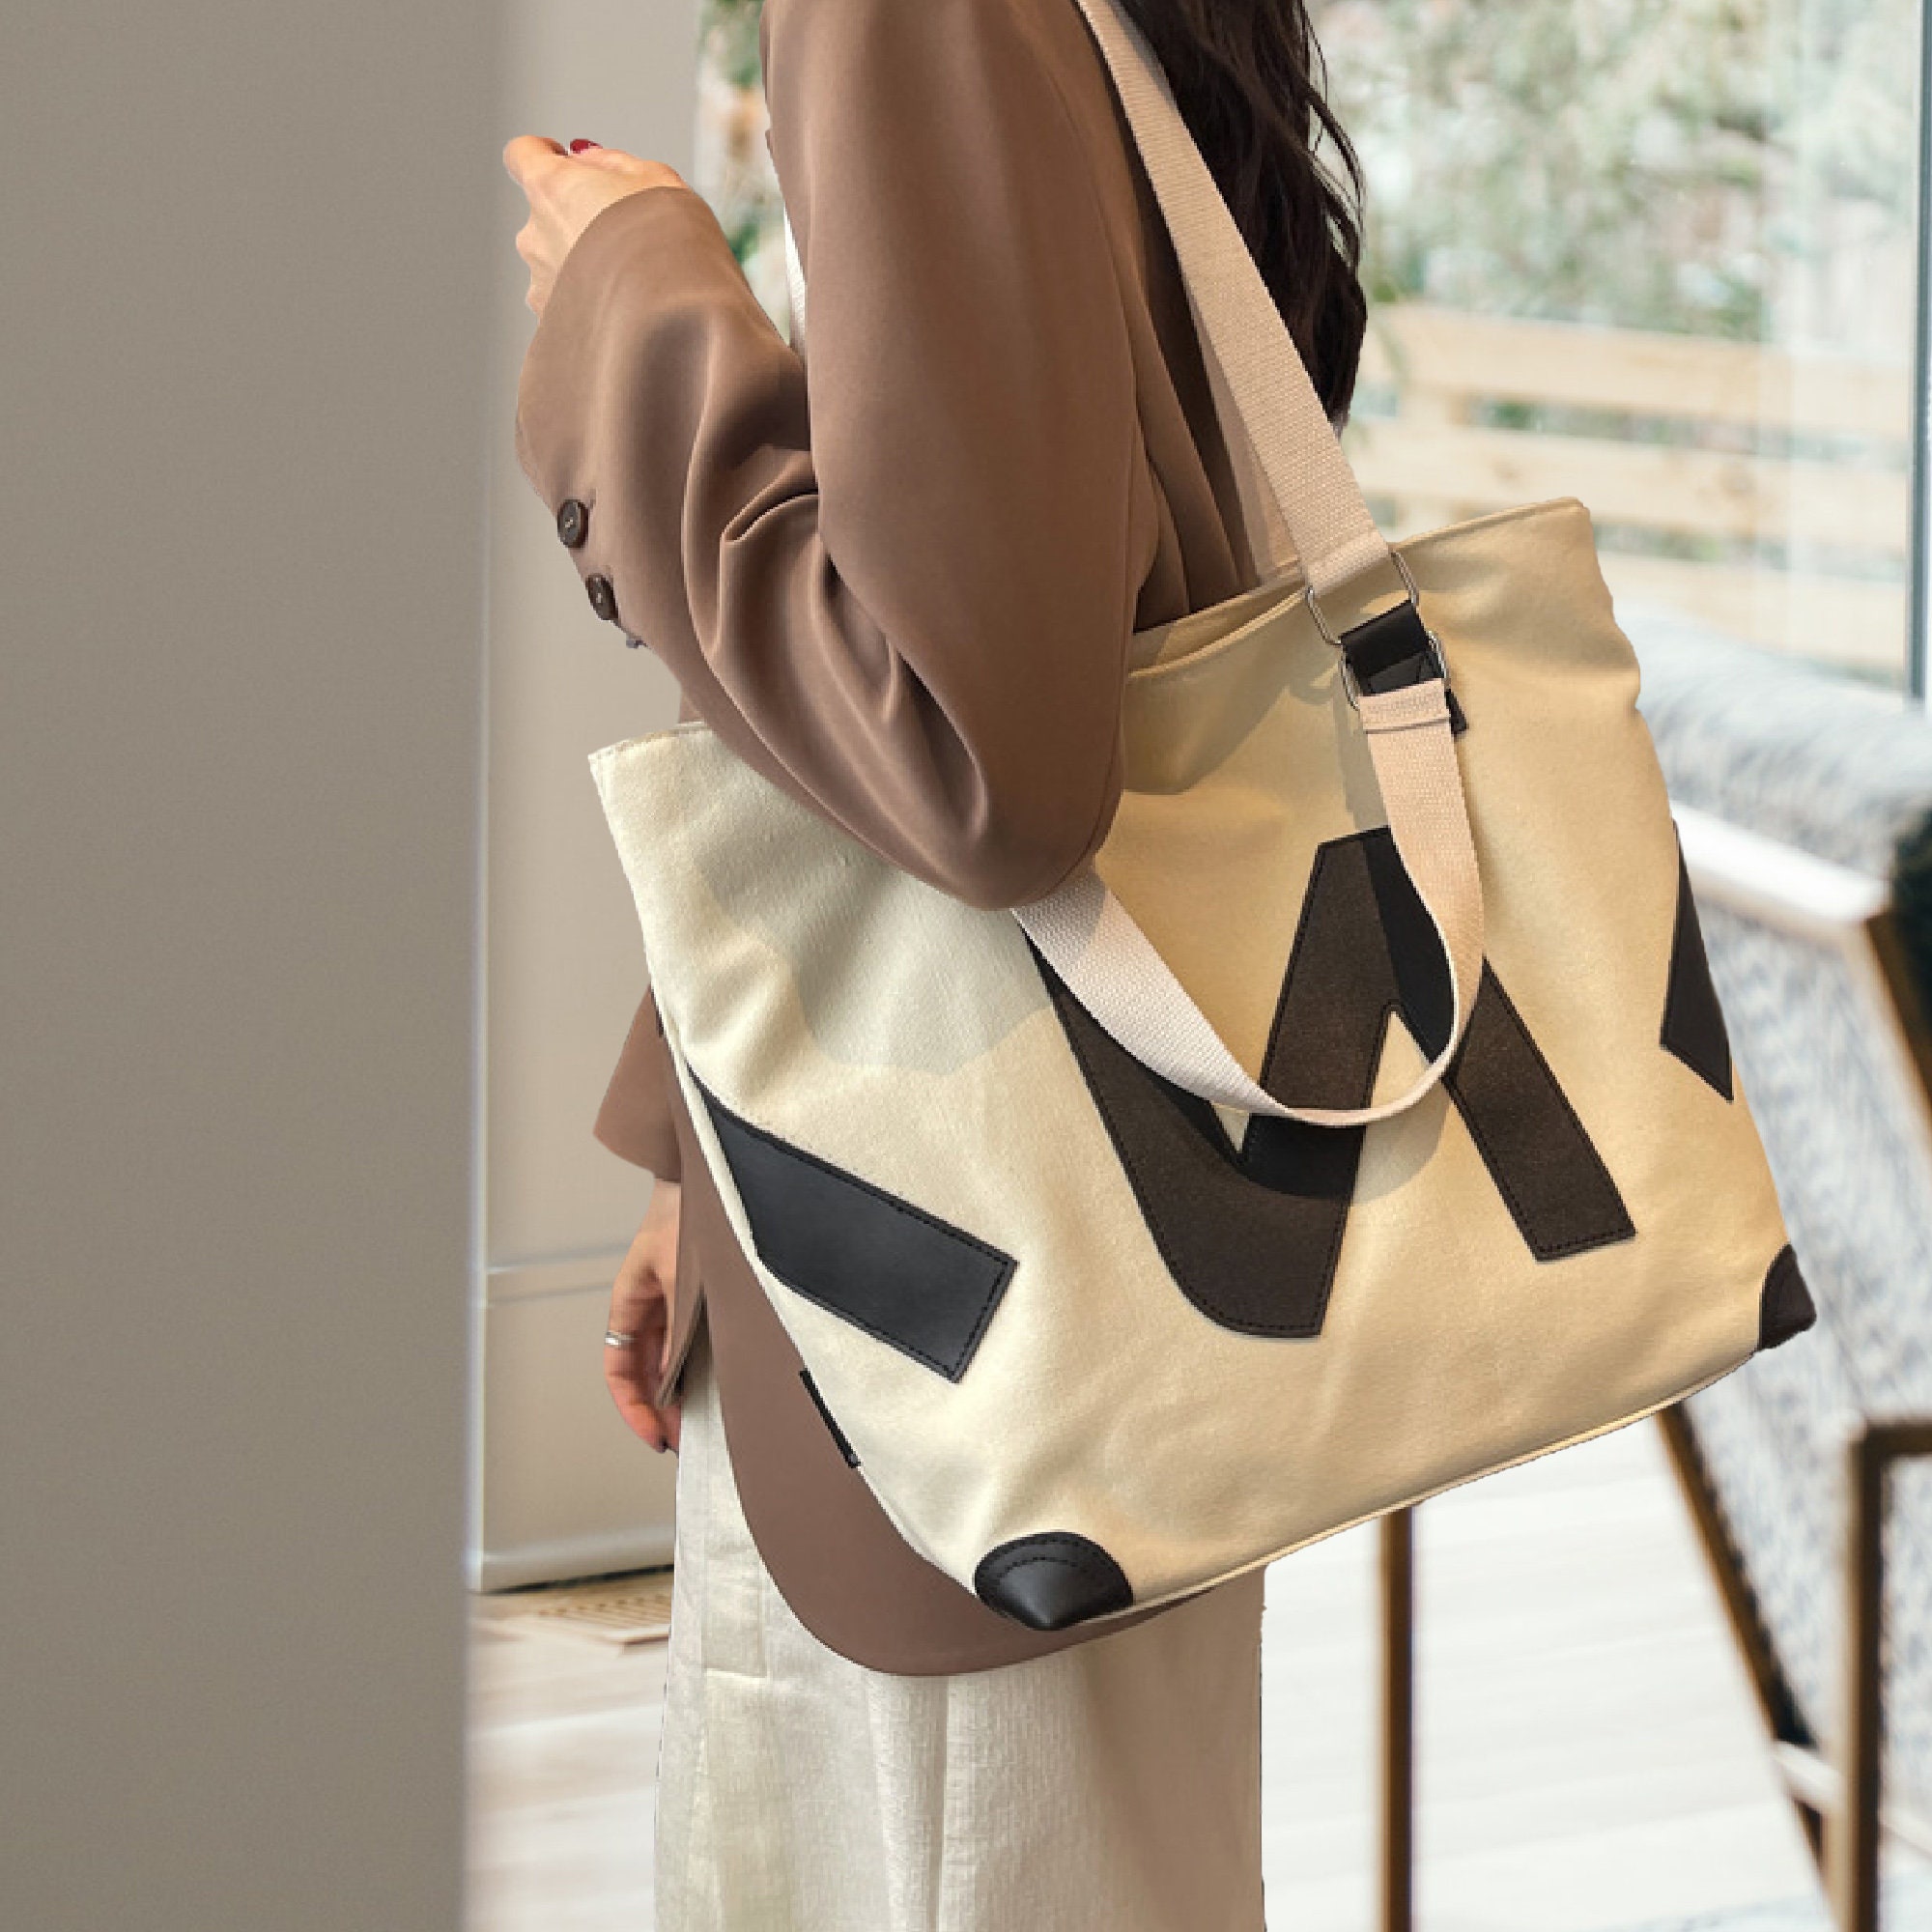 Buy Canvas Tote Bag Zipper Online In India -  India